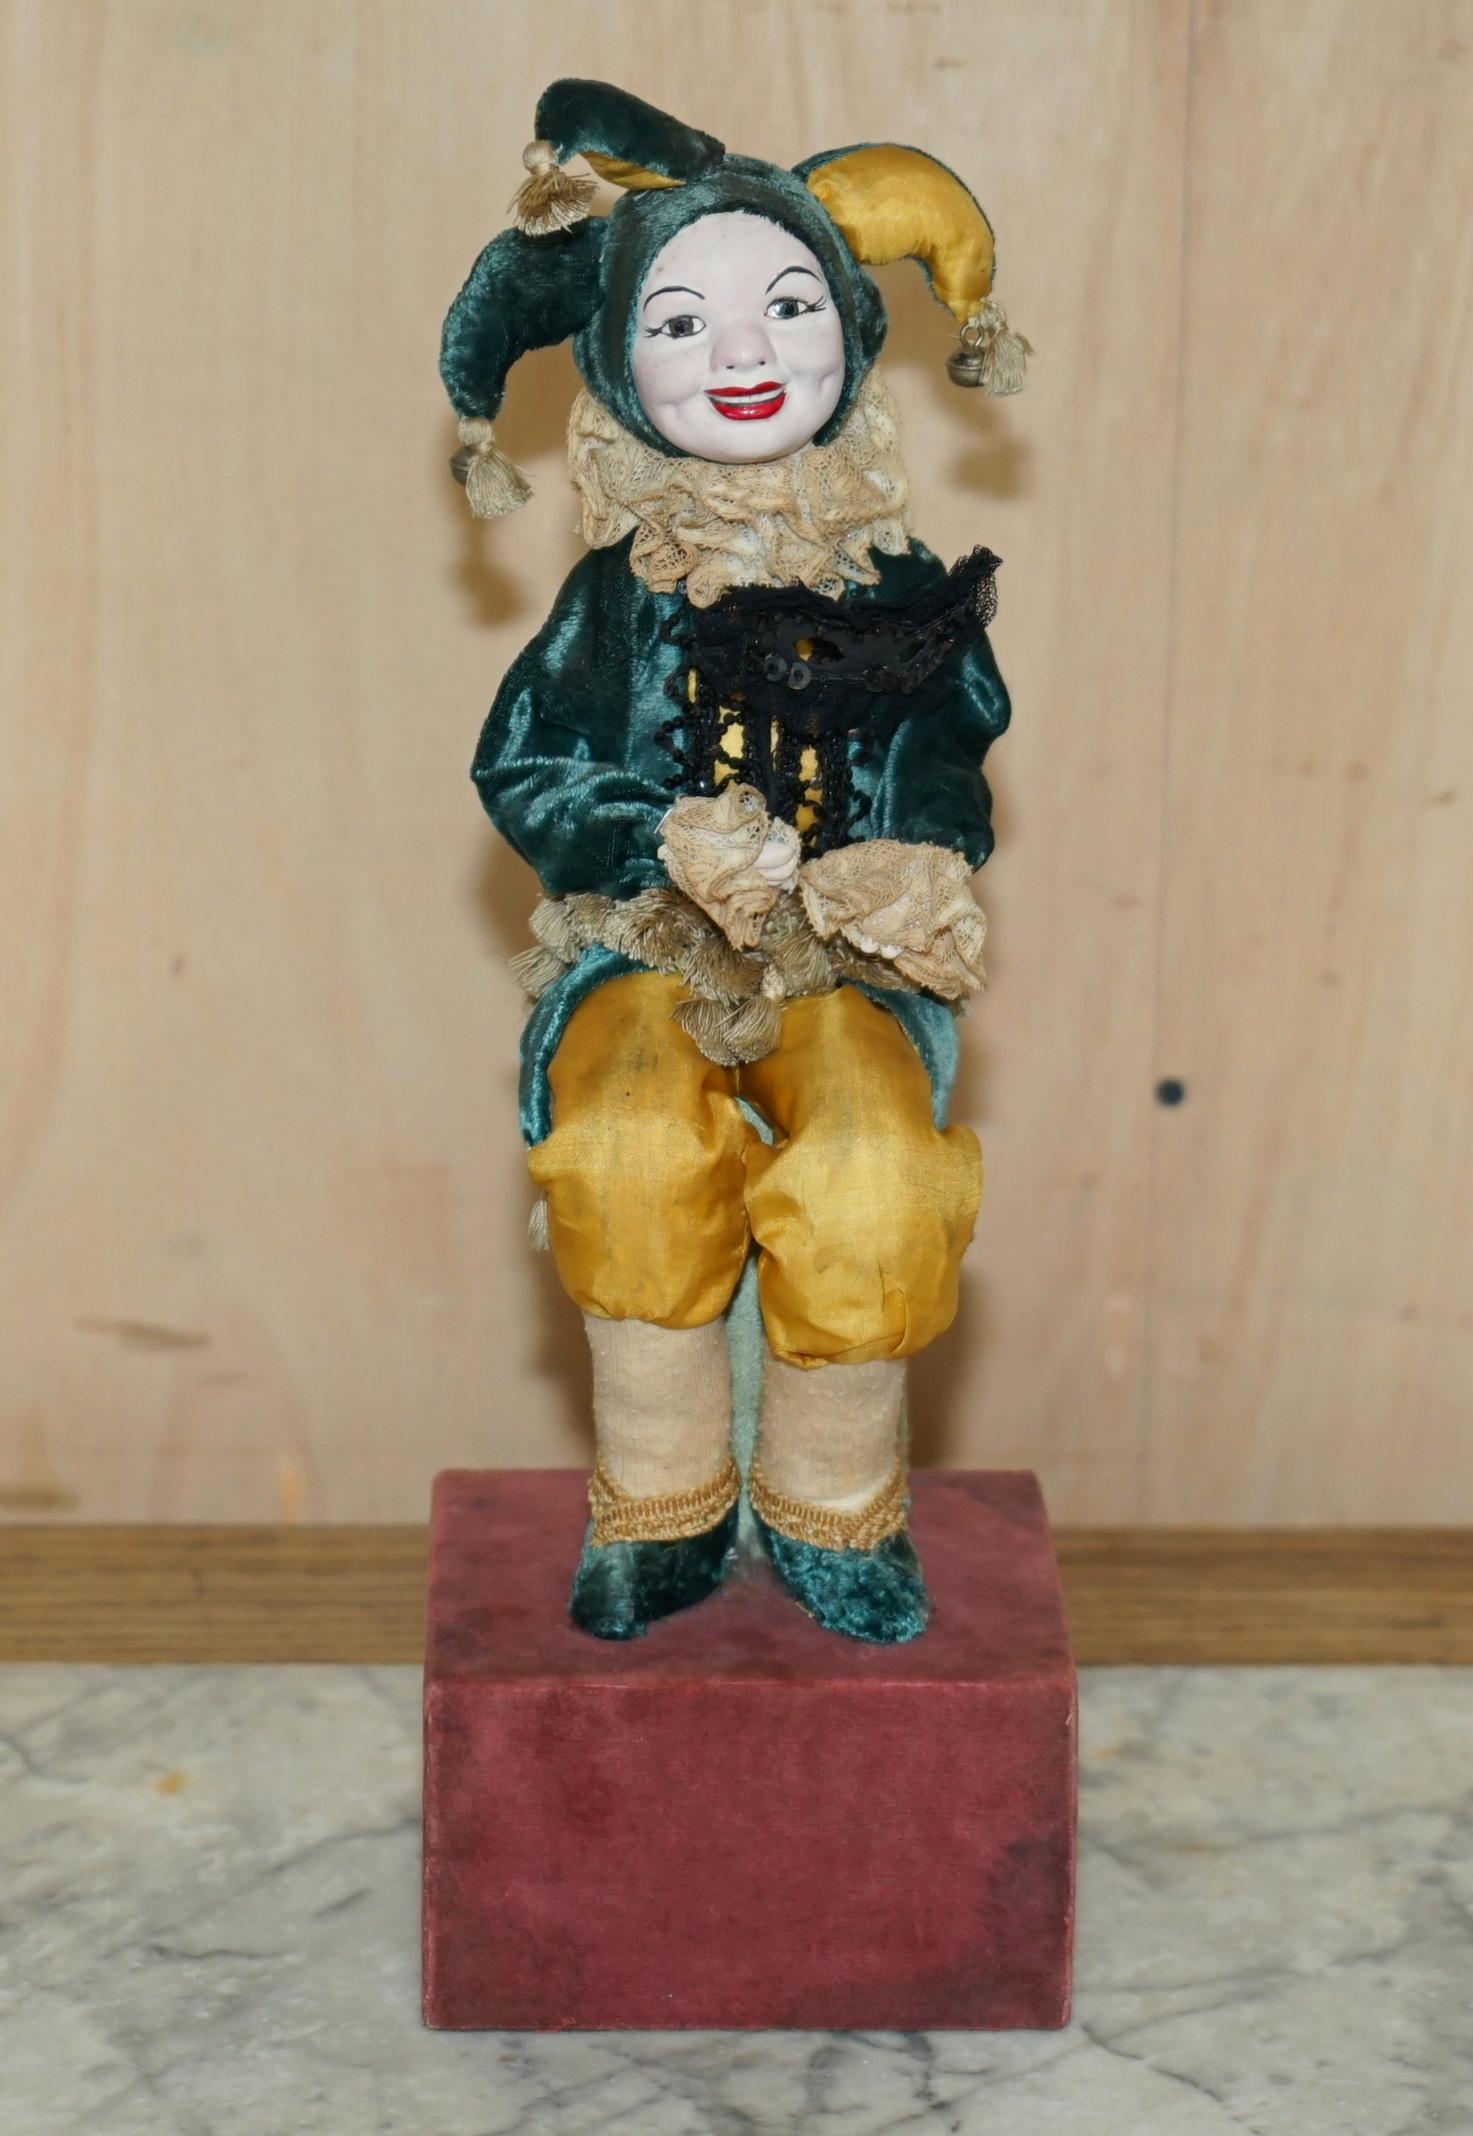 Royal House Antiques

Royal House Antiques is delighted to offer for sale this vintage French musical and moving Automaton Jester clown

A very good looking and well made piece, the hand moves to put the mask on and it plays music, I'm not 100% sure